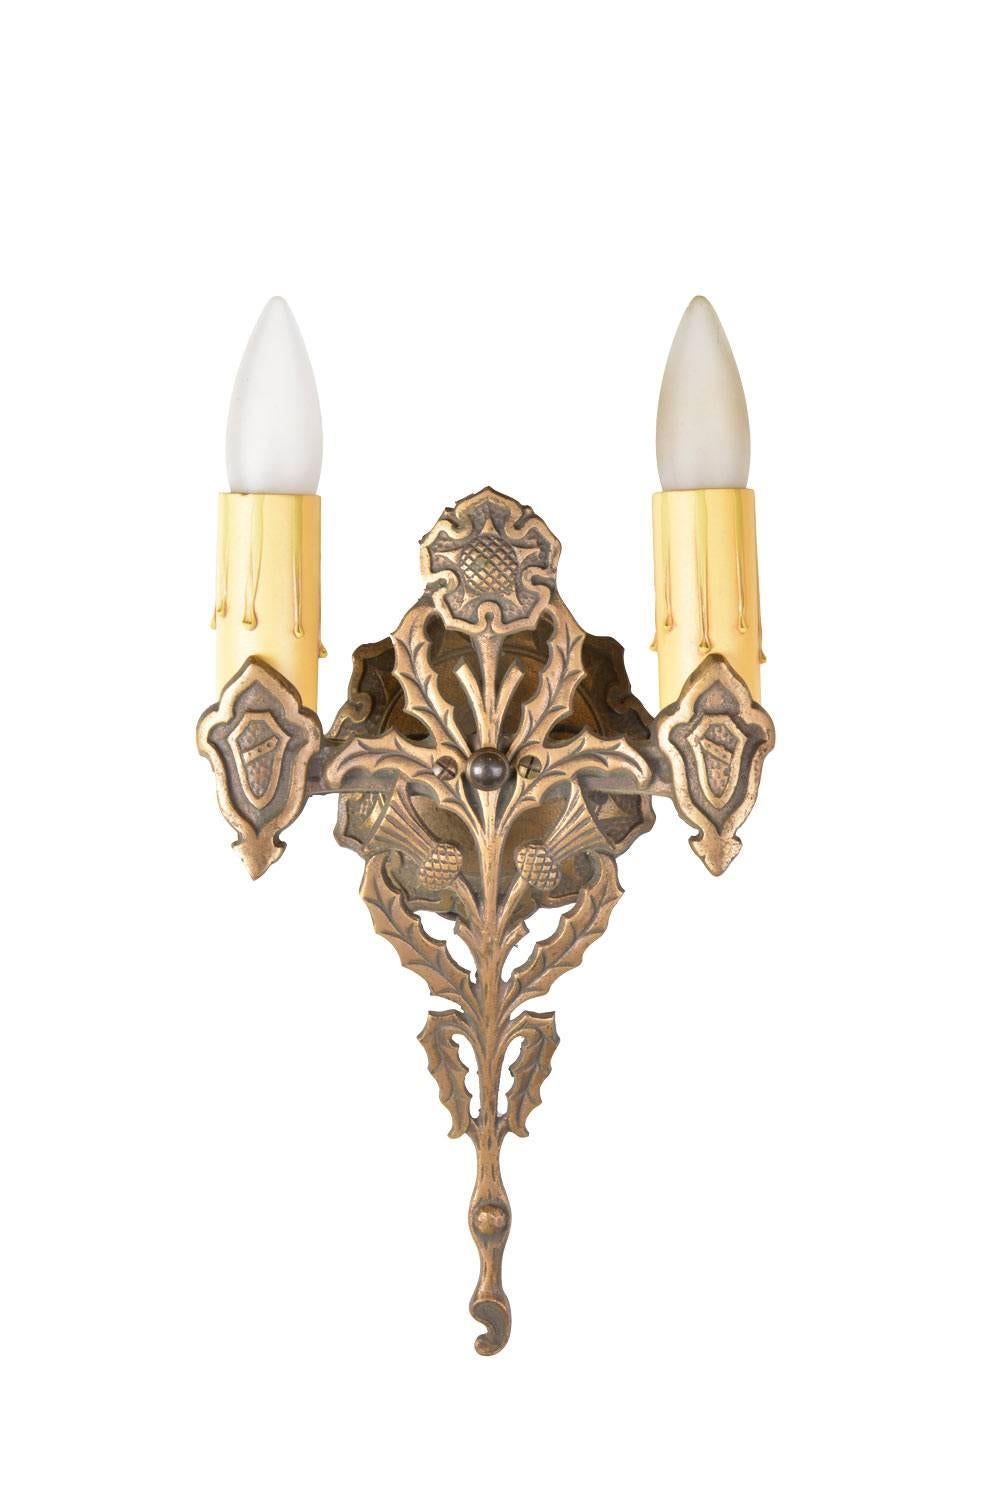 Beautiful and rich in tone, this two-arm bronze thistle sconce was designed in the Gothic style, with ornate leaf and flower detailing. 

We find that early antique lighting was designed as objects of art and we treat each fixture with careful